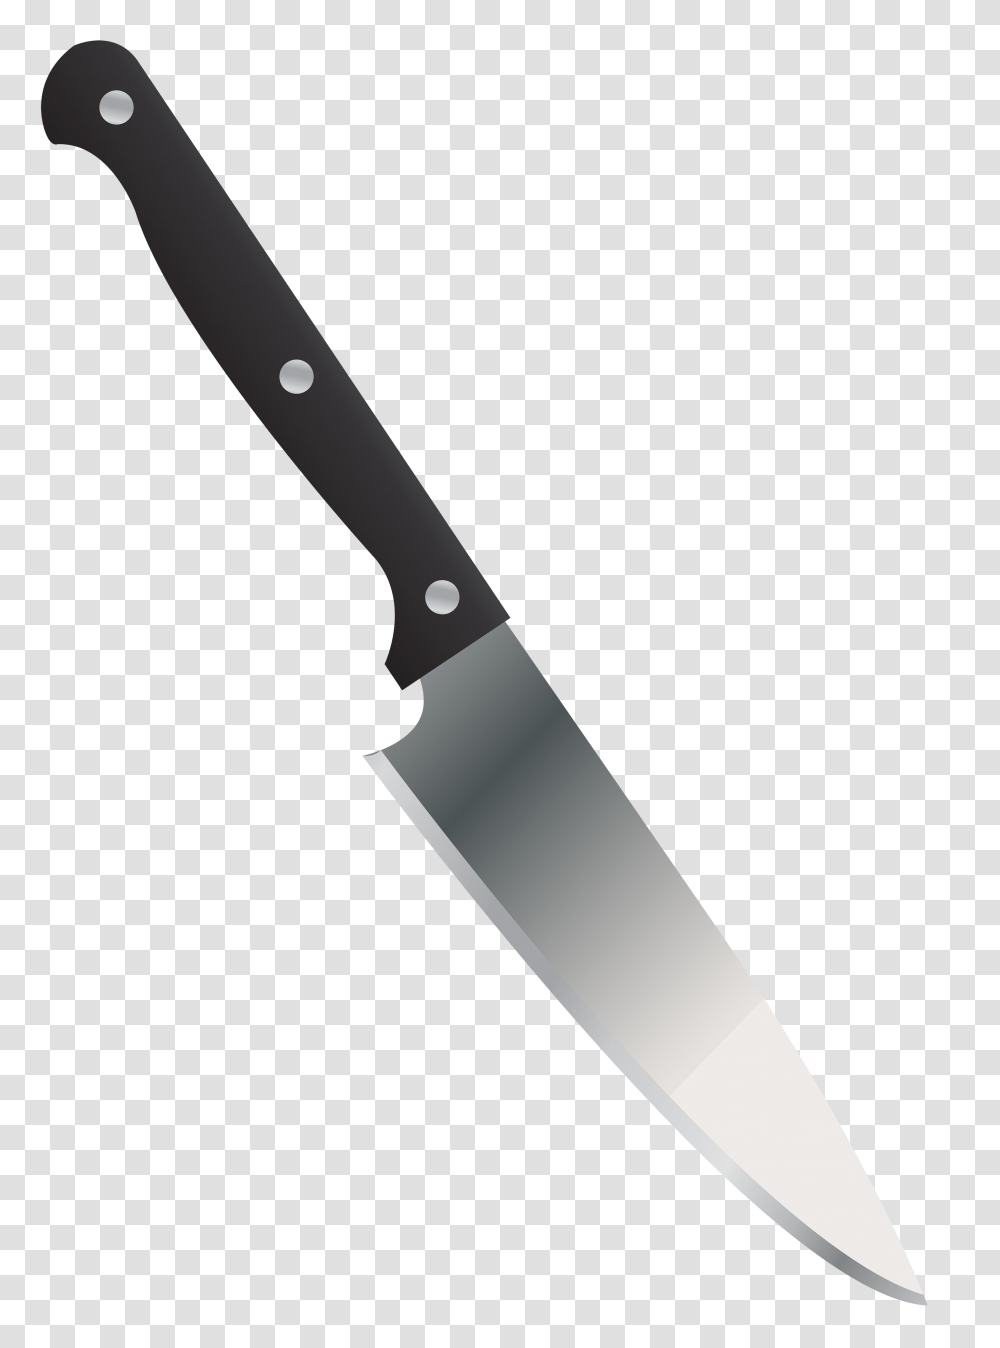 Download Clipart Images Kitchen Knives Knife, Handrail, Label, Blade, Weapon Transparent Png